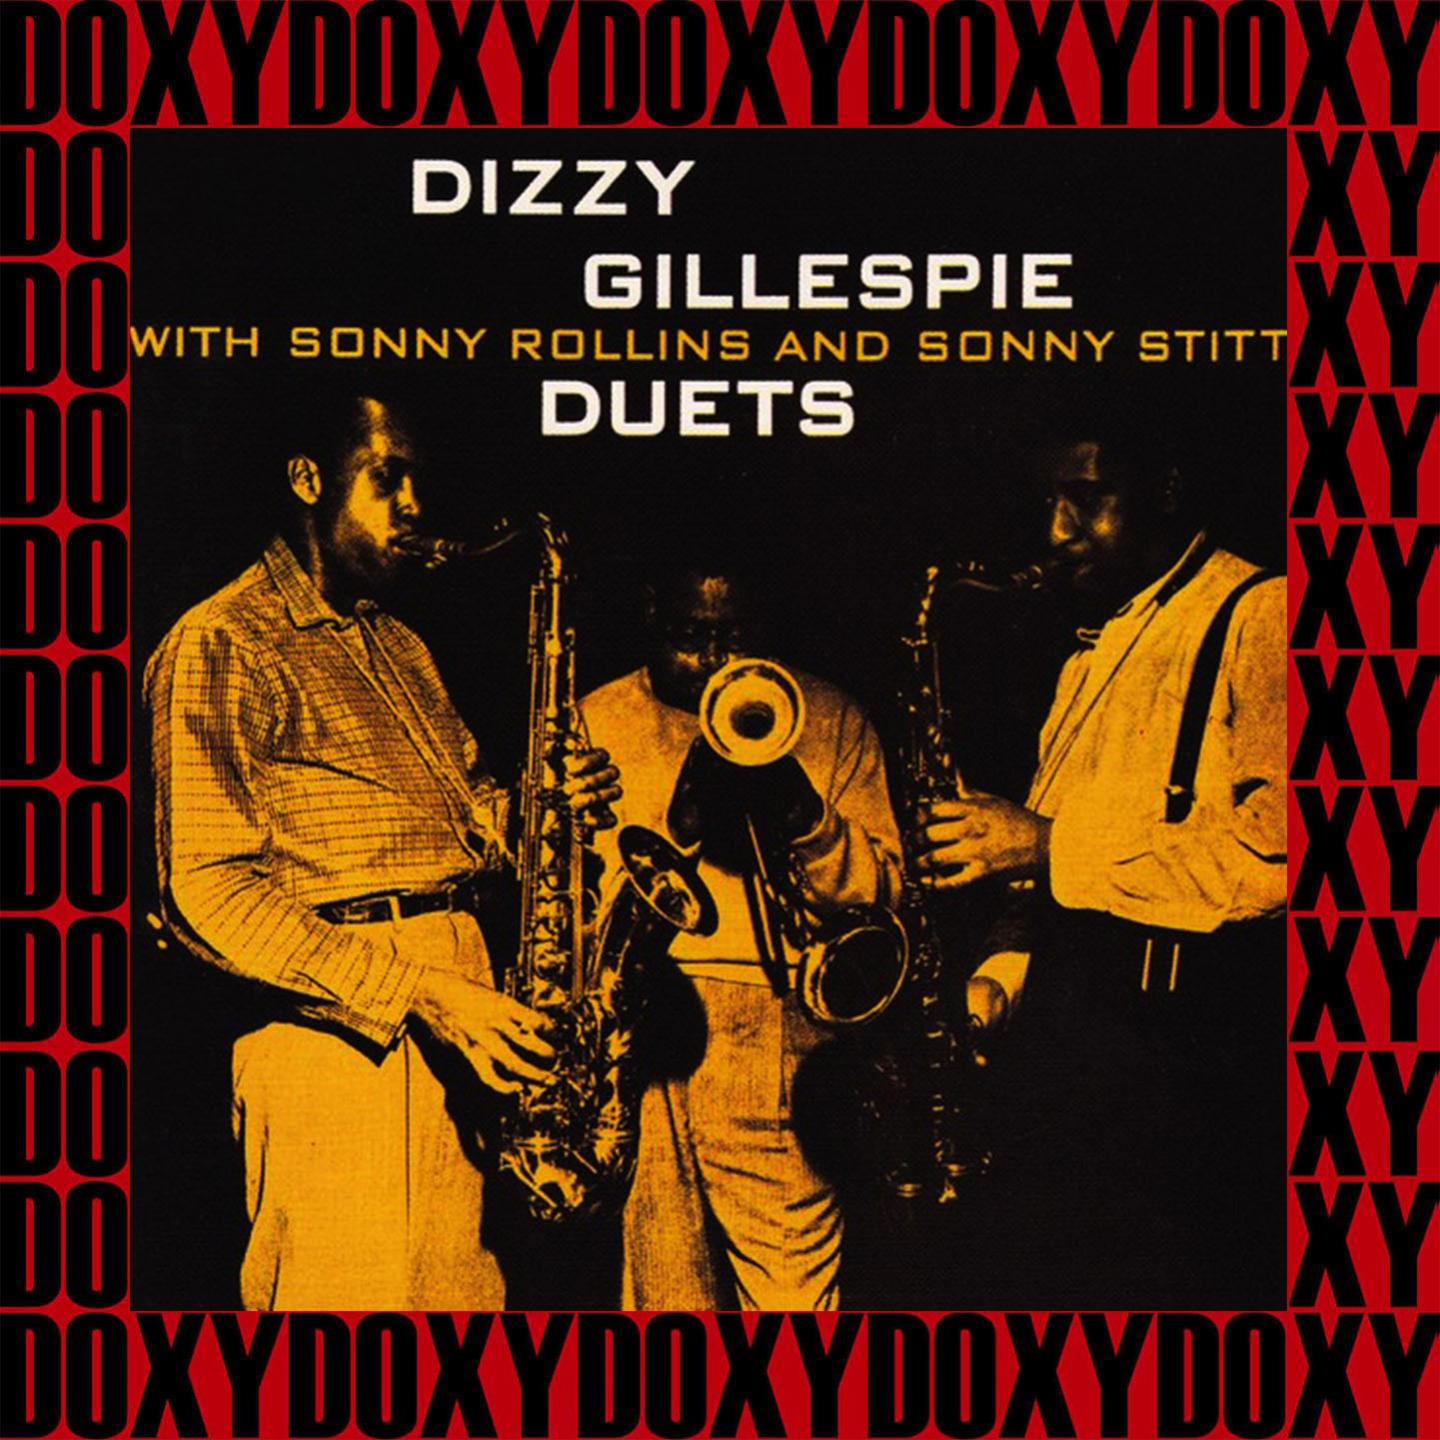 Duets with Sonny Rollins and Sonny Stitt (Expanded, Remastered Version) (Doxy Collection)